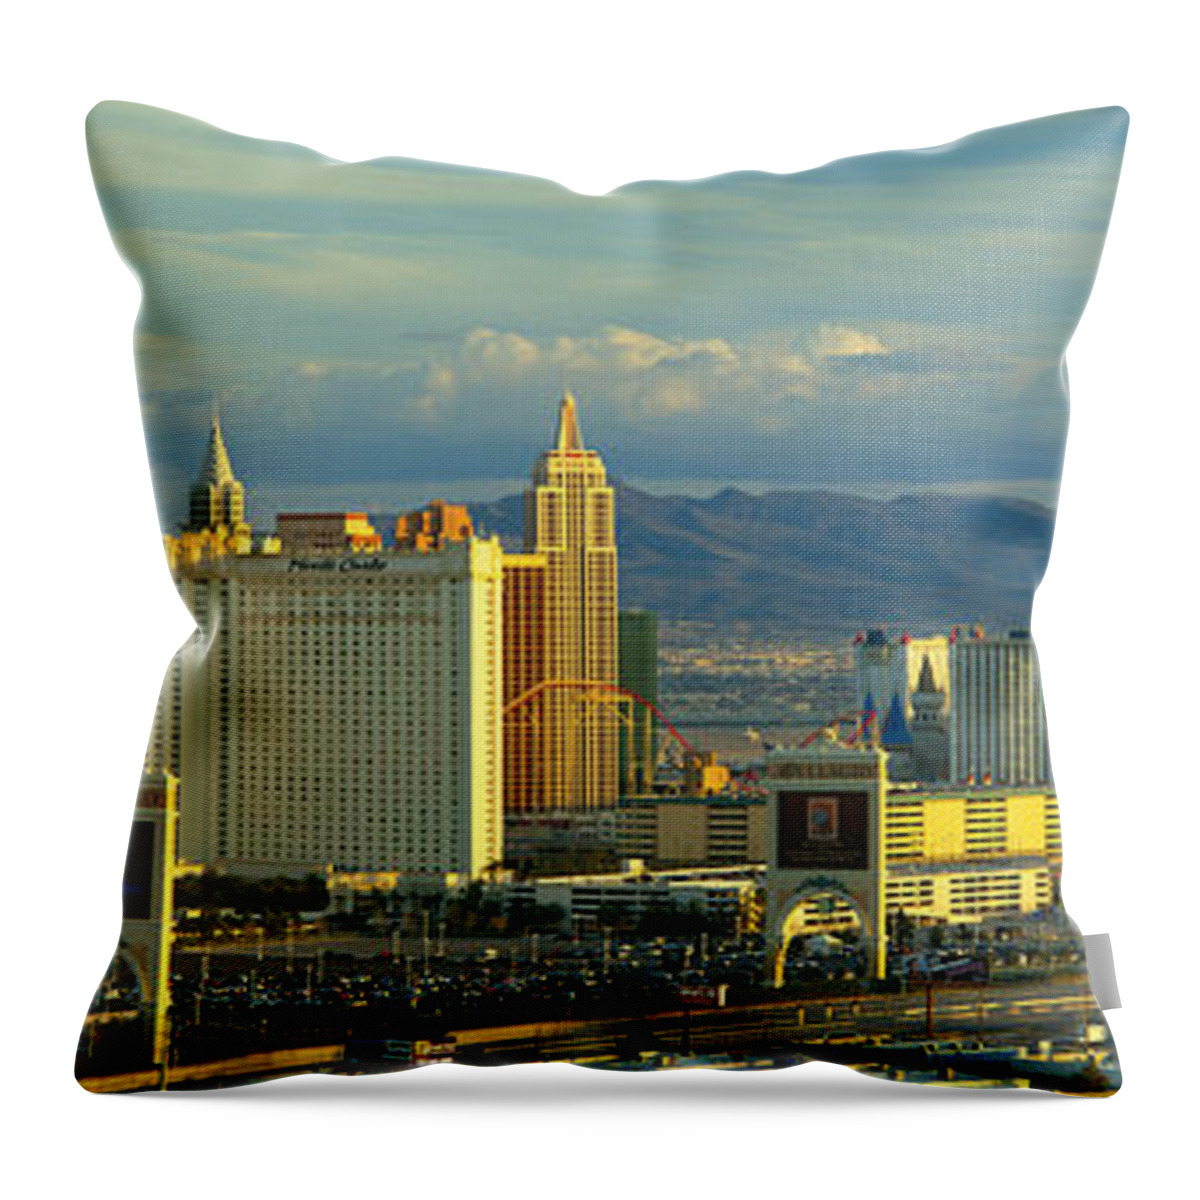 Photography Throw Pillow featuring the photograph Afternoon The Strip Las Vegas Nv Usa by Panoramic Images